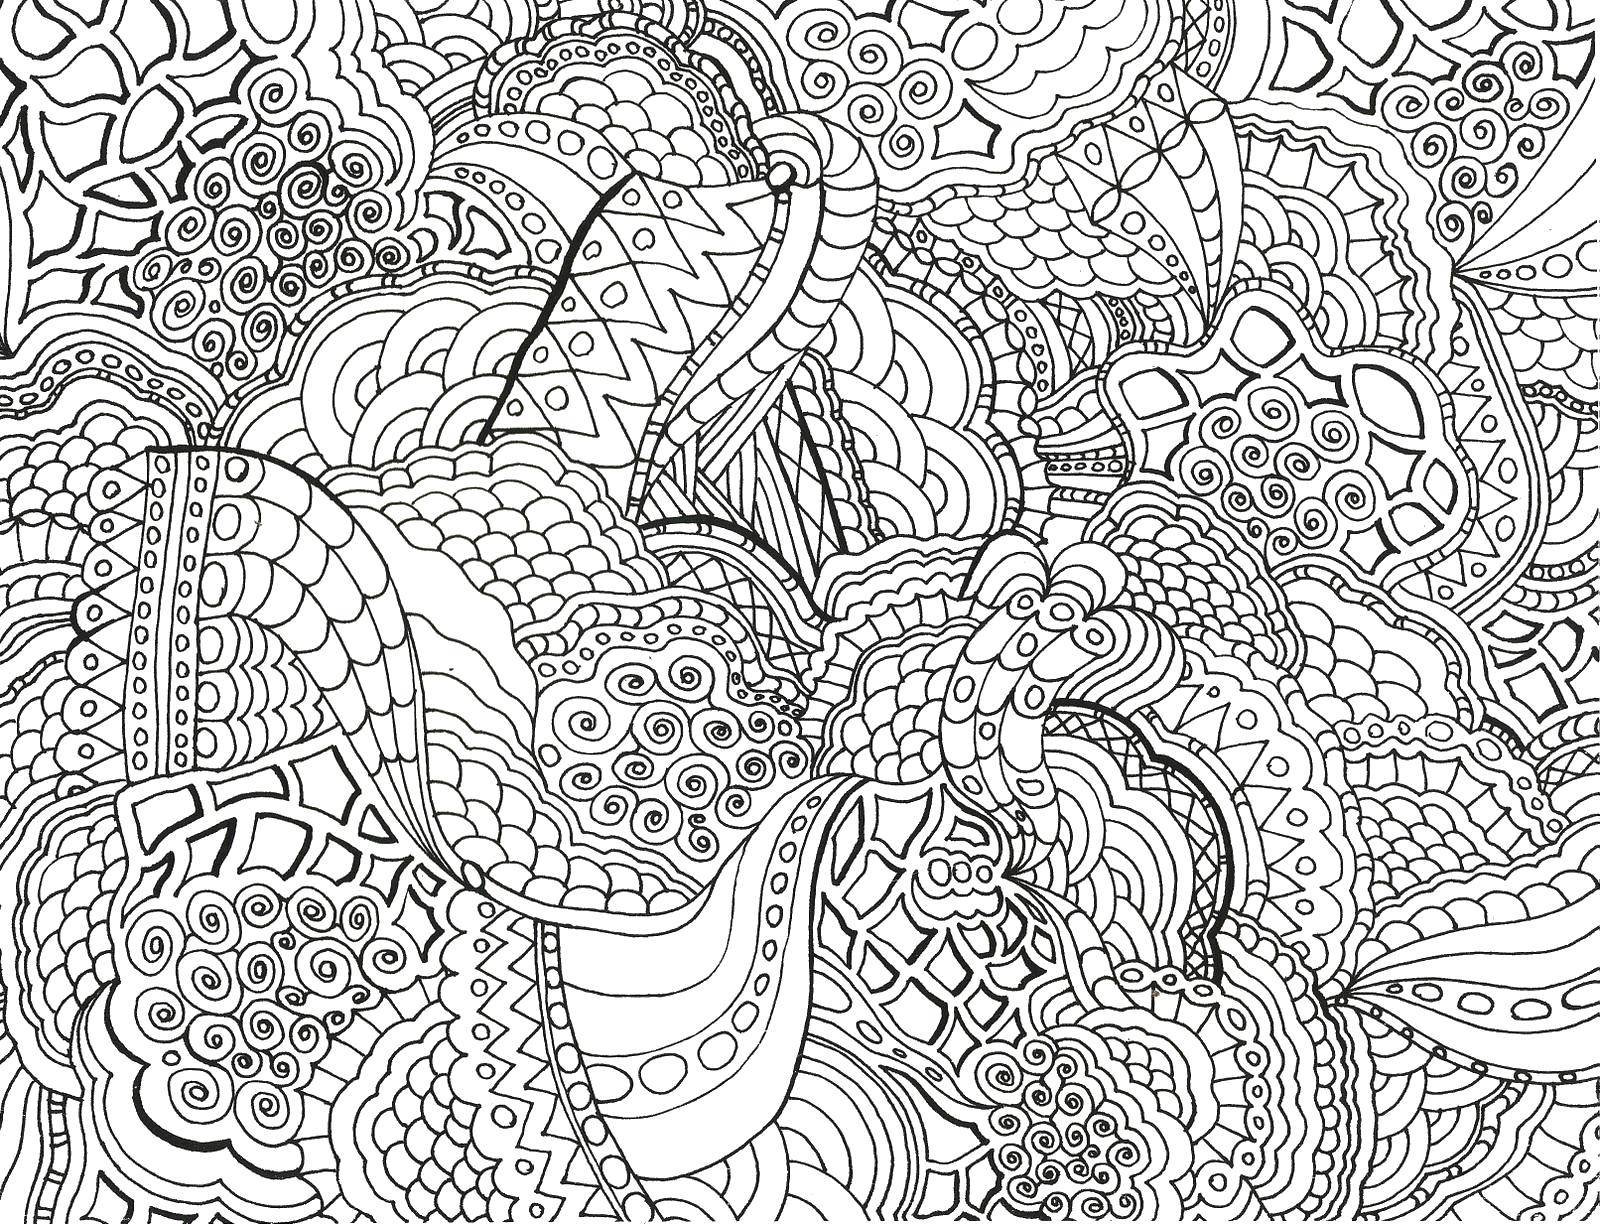 Coloring Neoncity pattern. Category Patterns. Tags:  Patterns, flower.